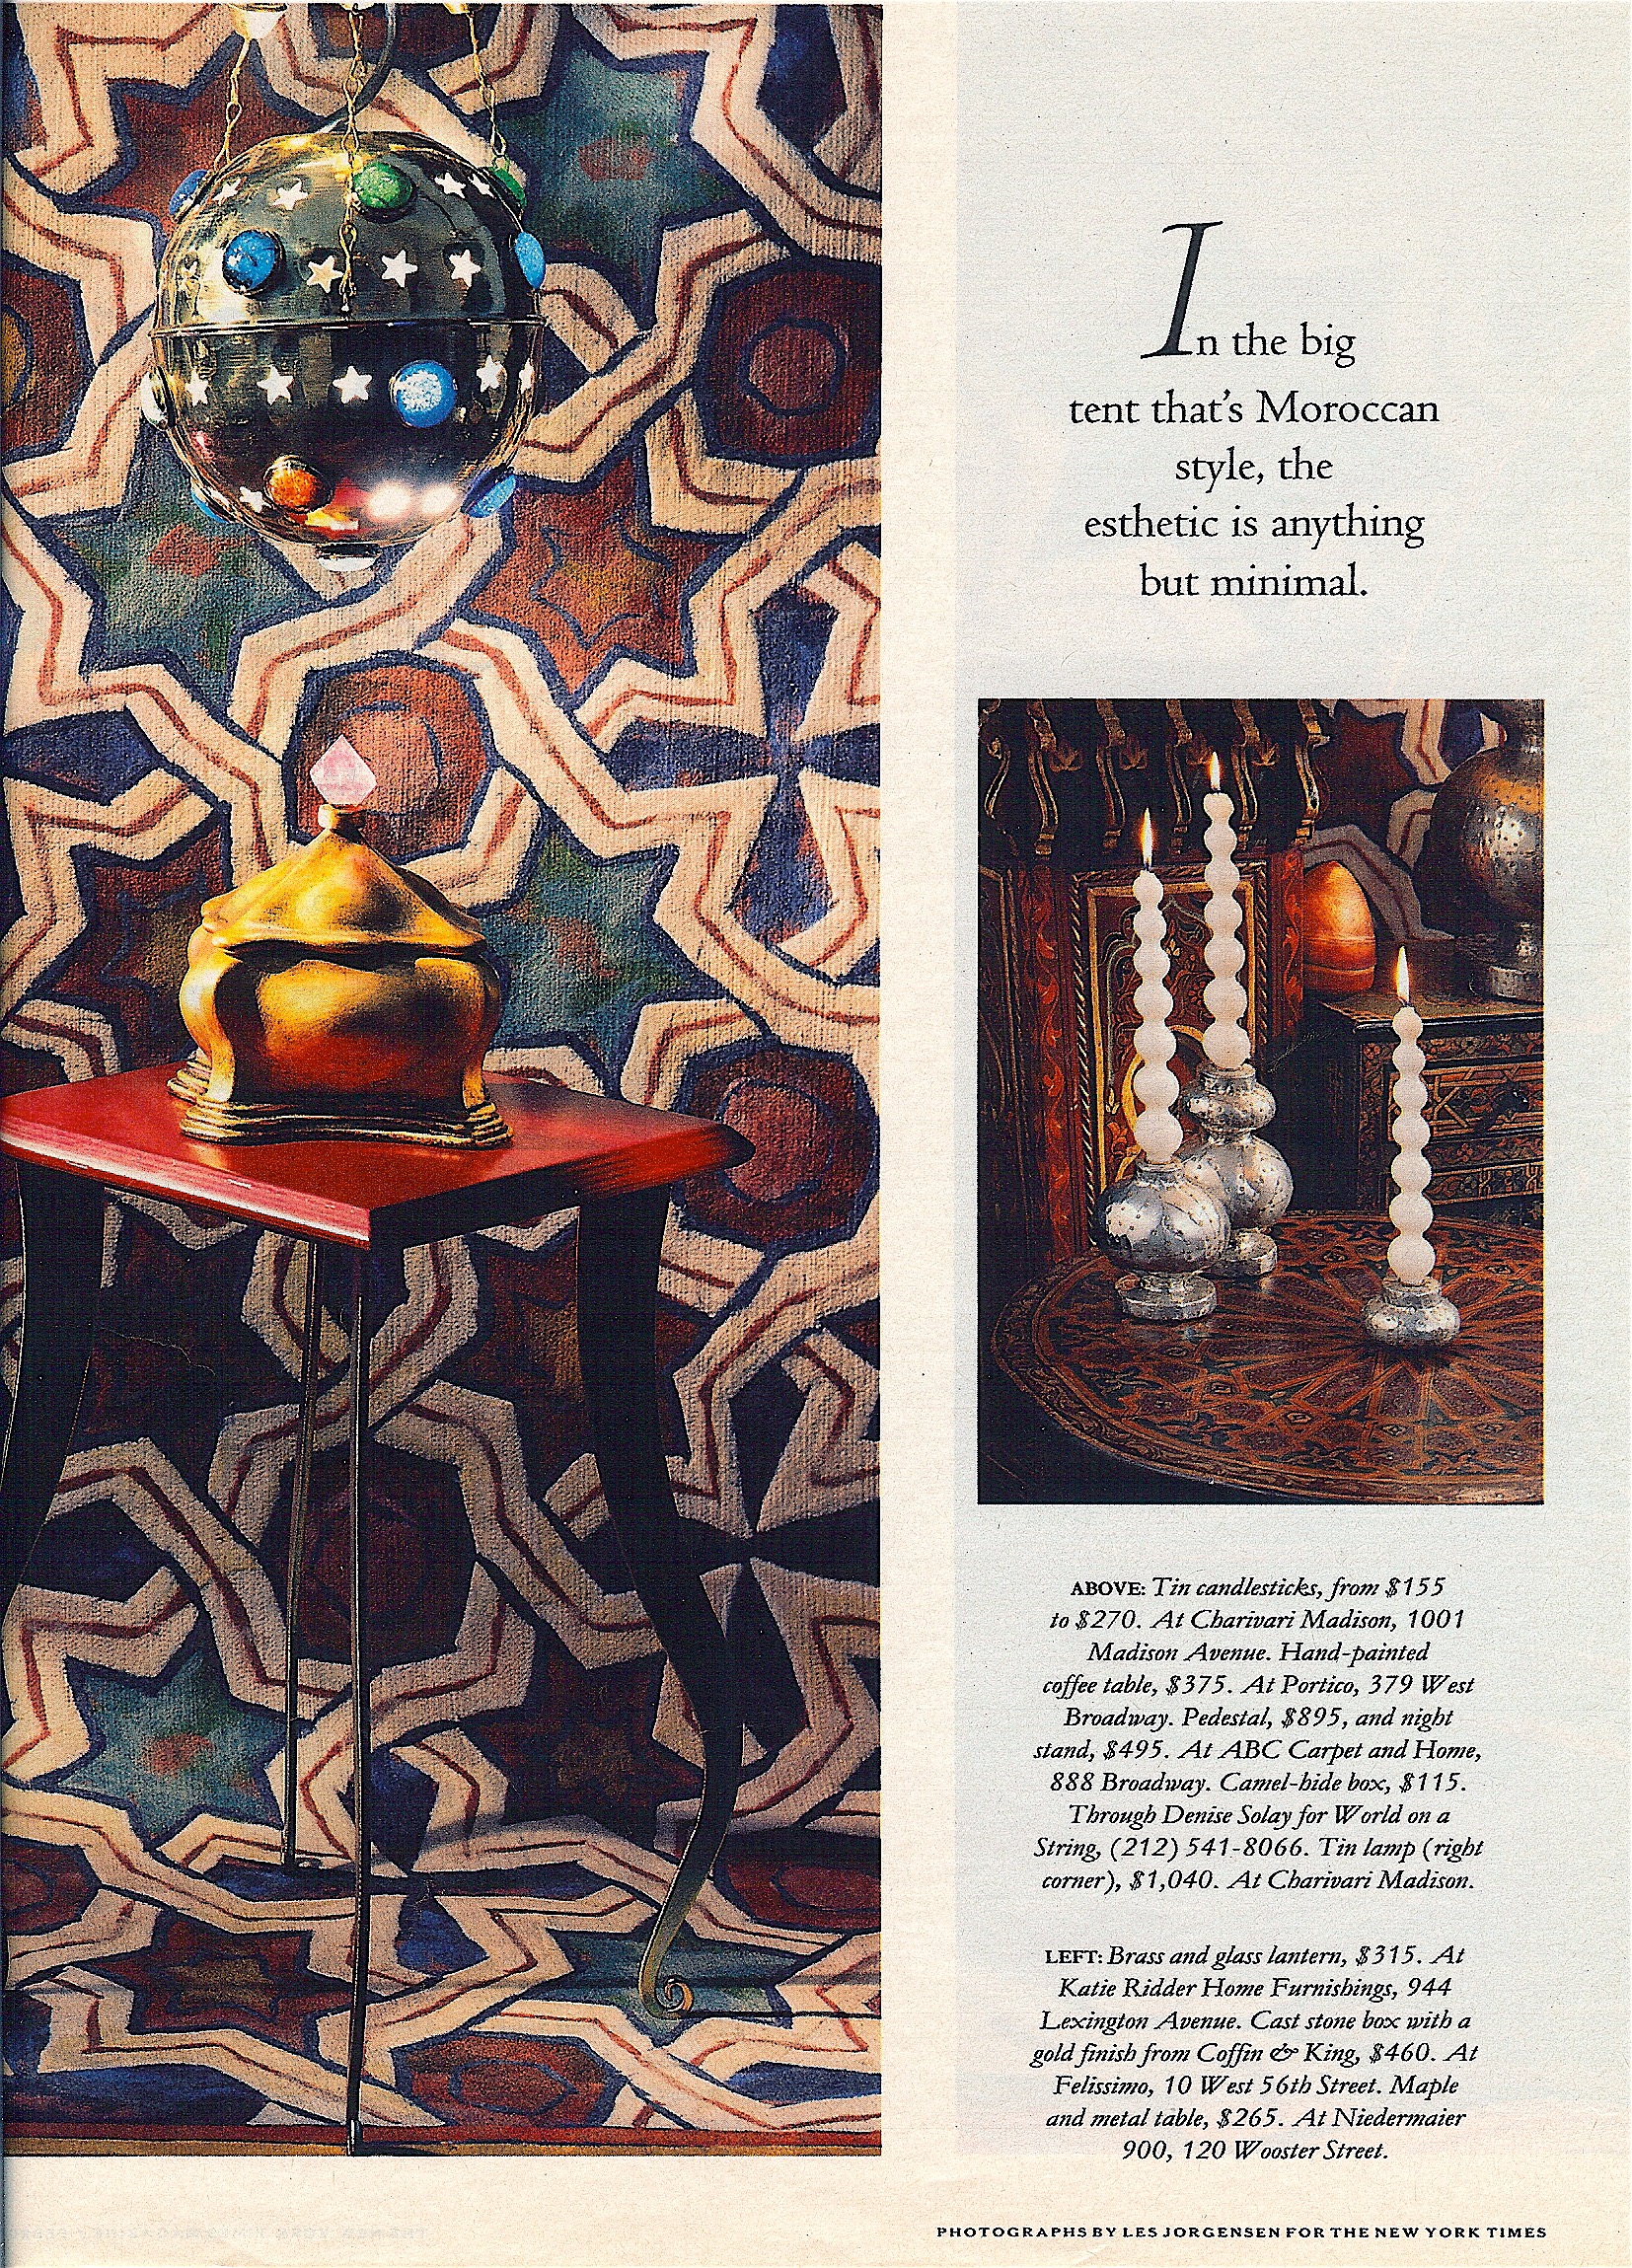 Coffin & King Press - Coffin & King Gilded Box featured in The New York Times Magazine